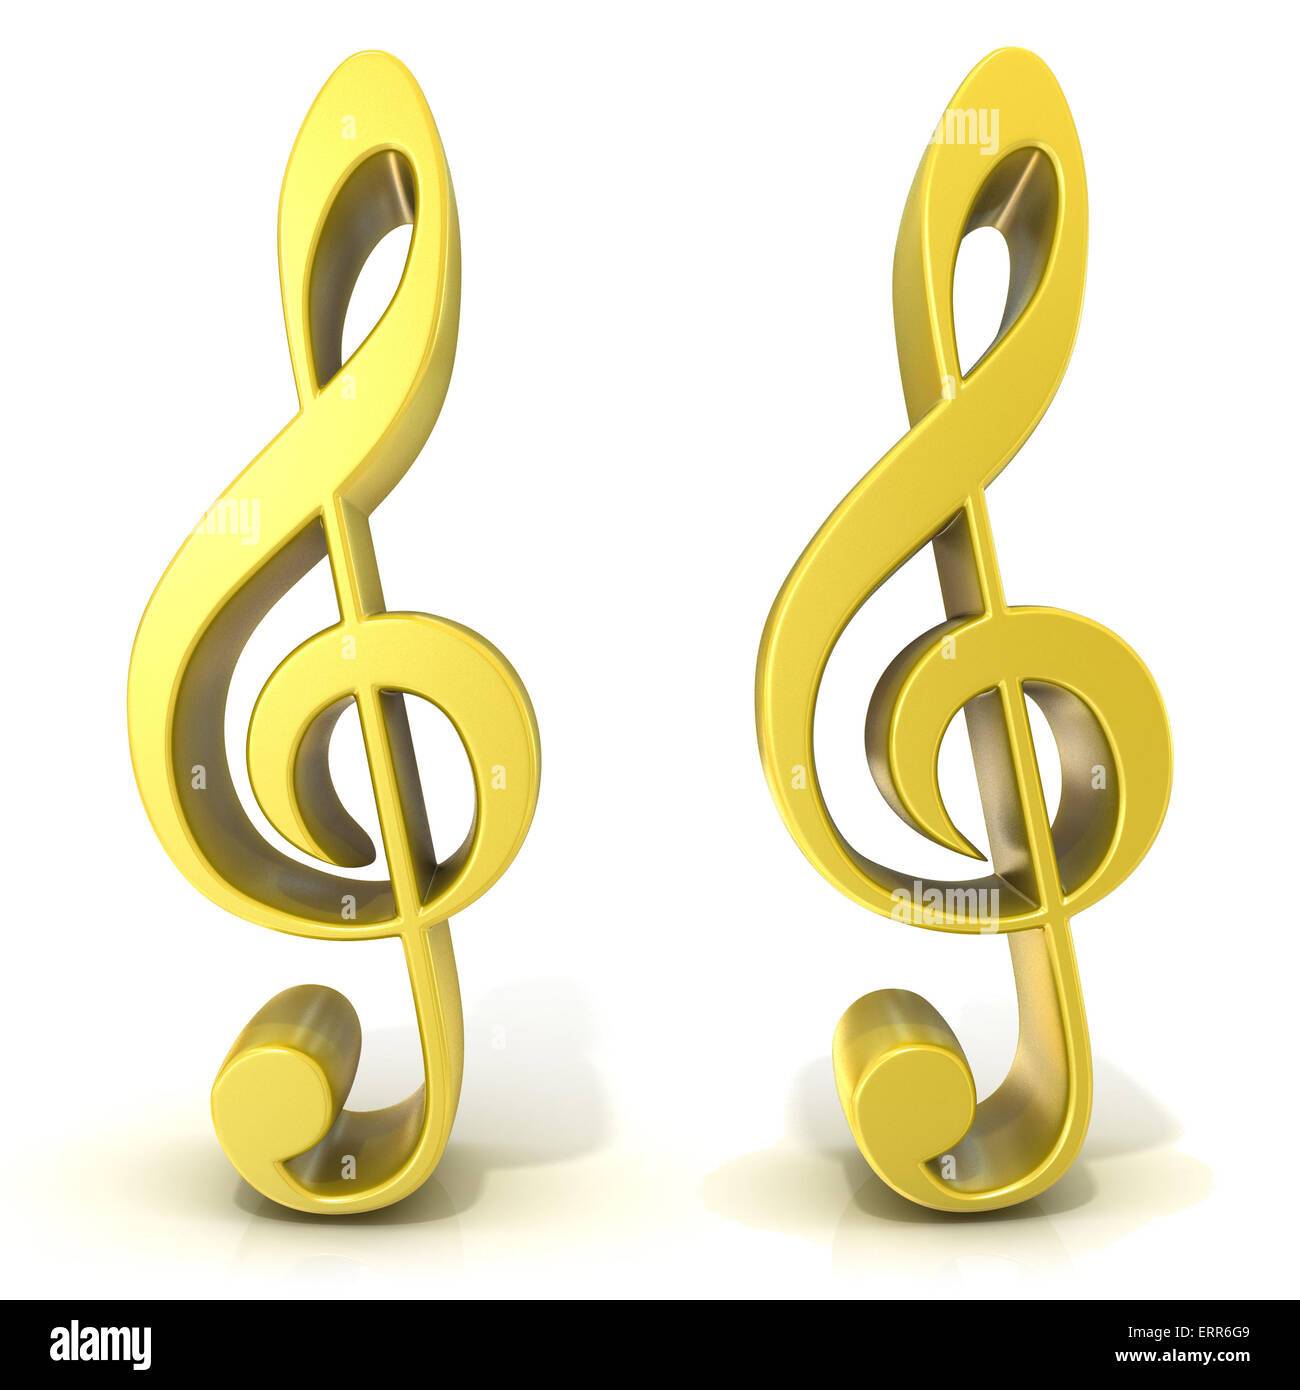 Golden treble clefs isolated on white background Stock Photo